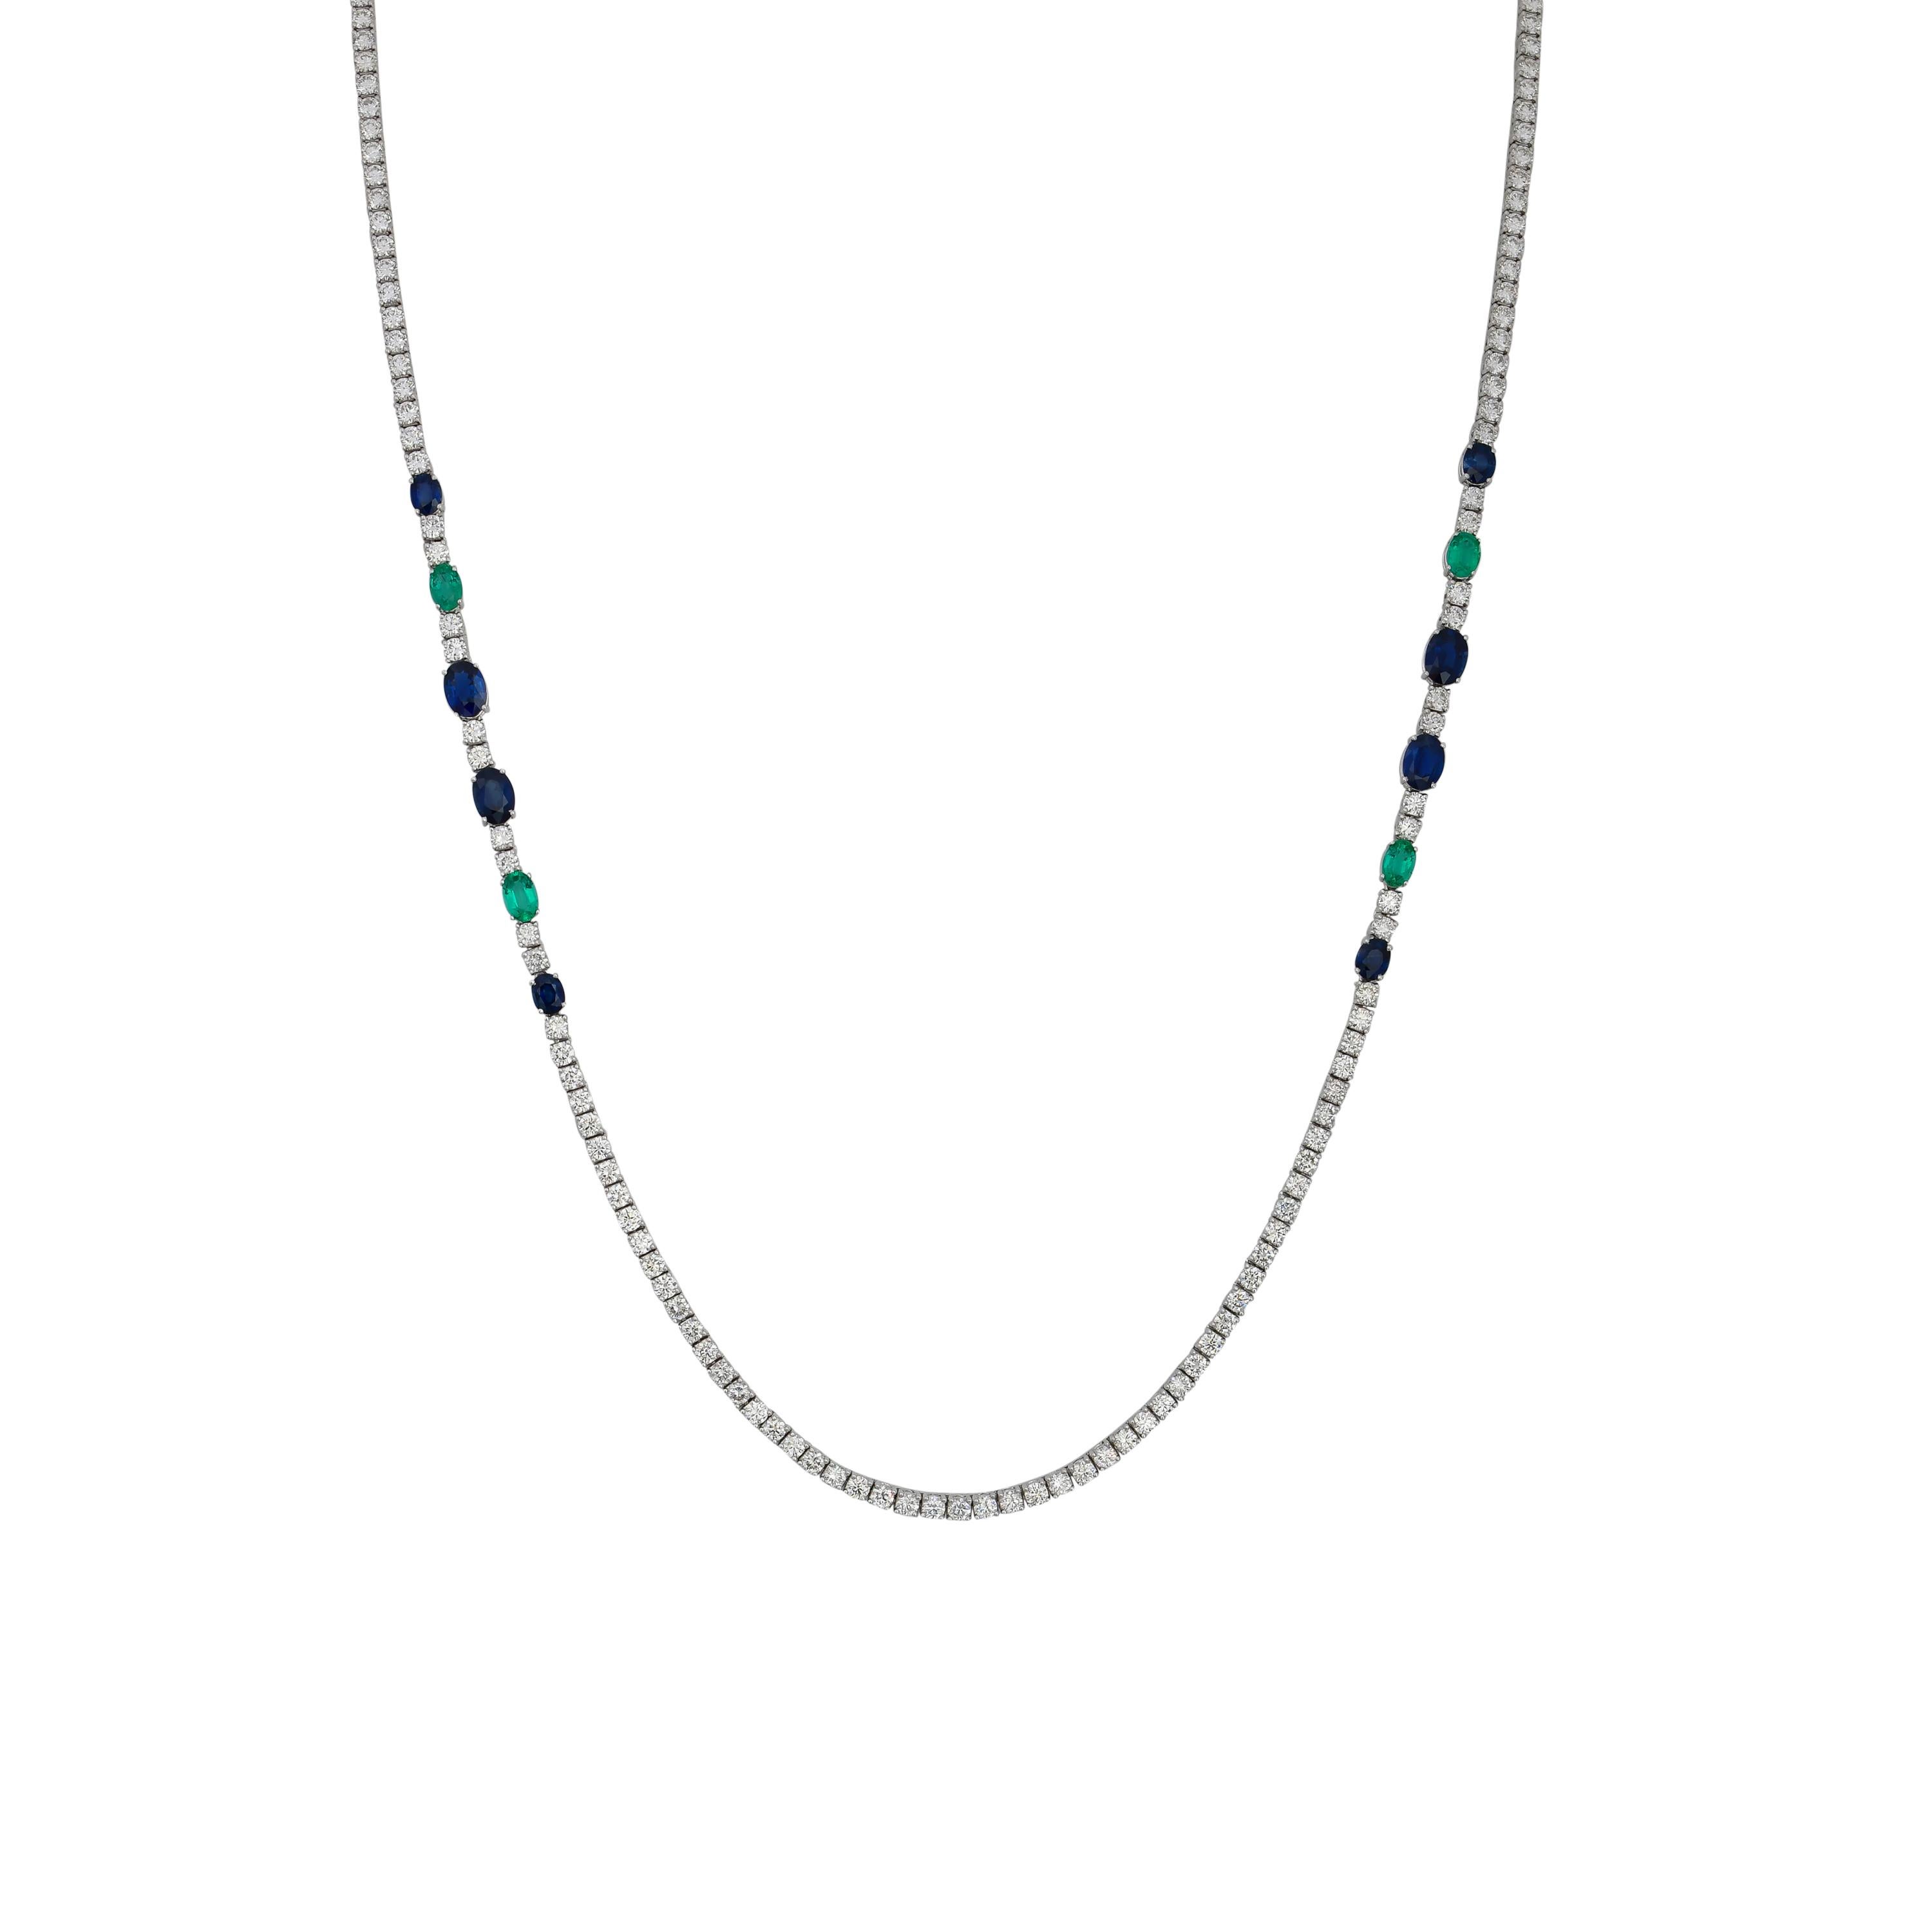 A classic long diamond necklace with a colorful twist with accents of vibrant blue sapphires and emeralds. A timeless piece that will never go out of style and will only appreciate in value over time. Exclusively by Sunita Nahata Fine